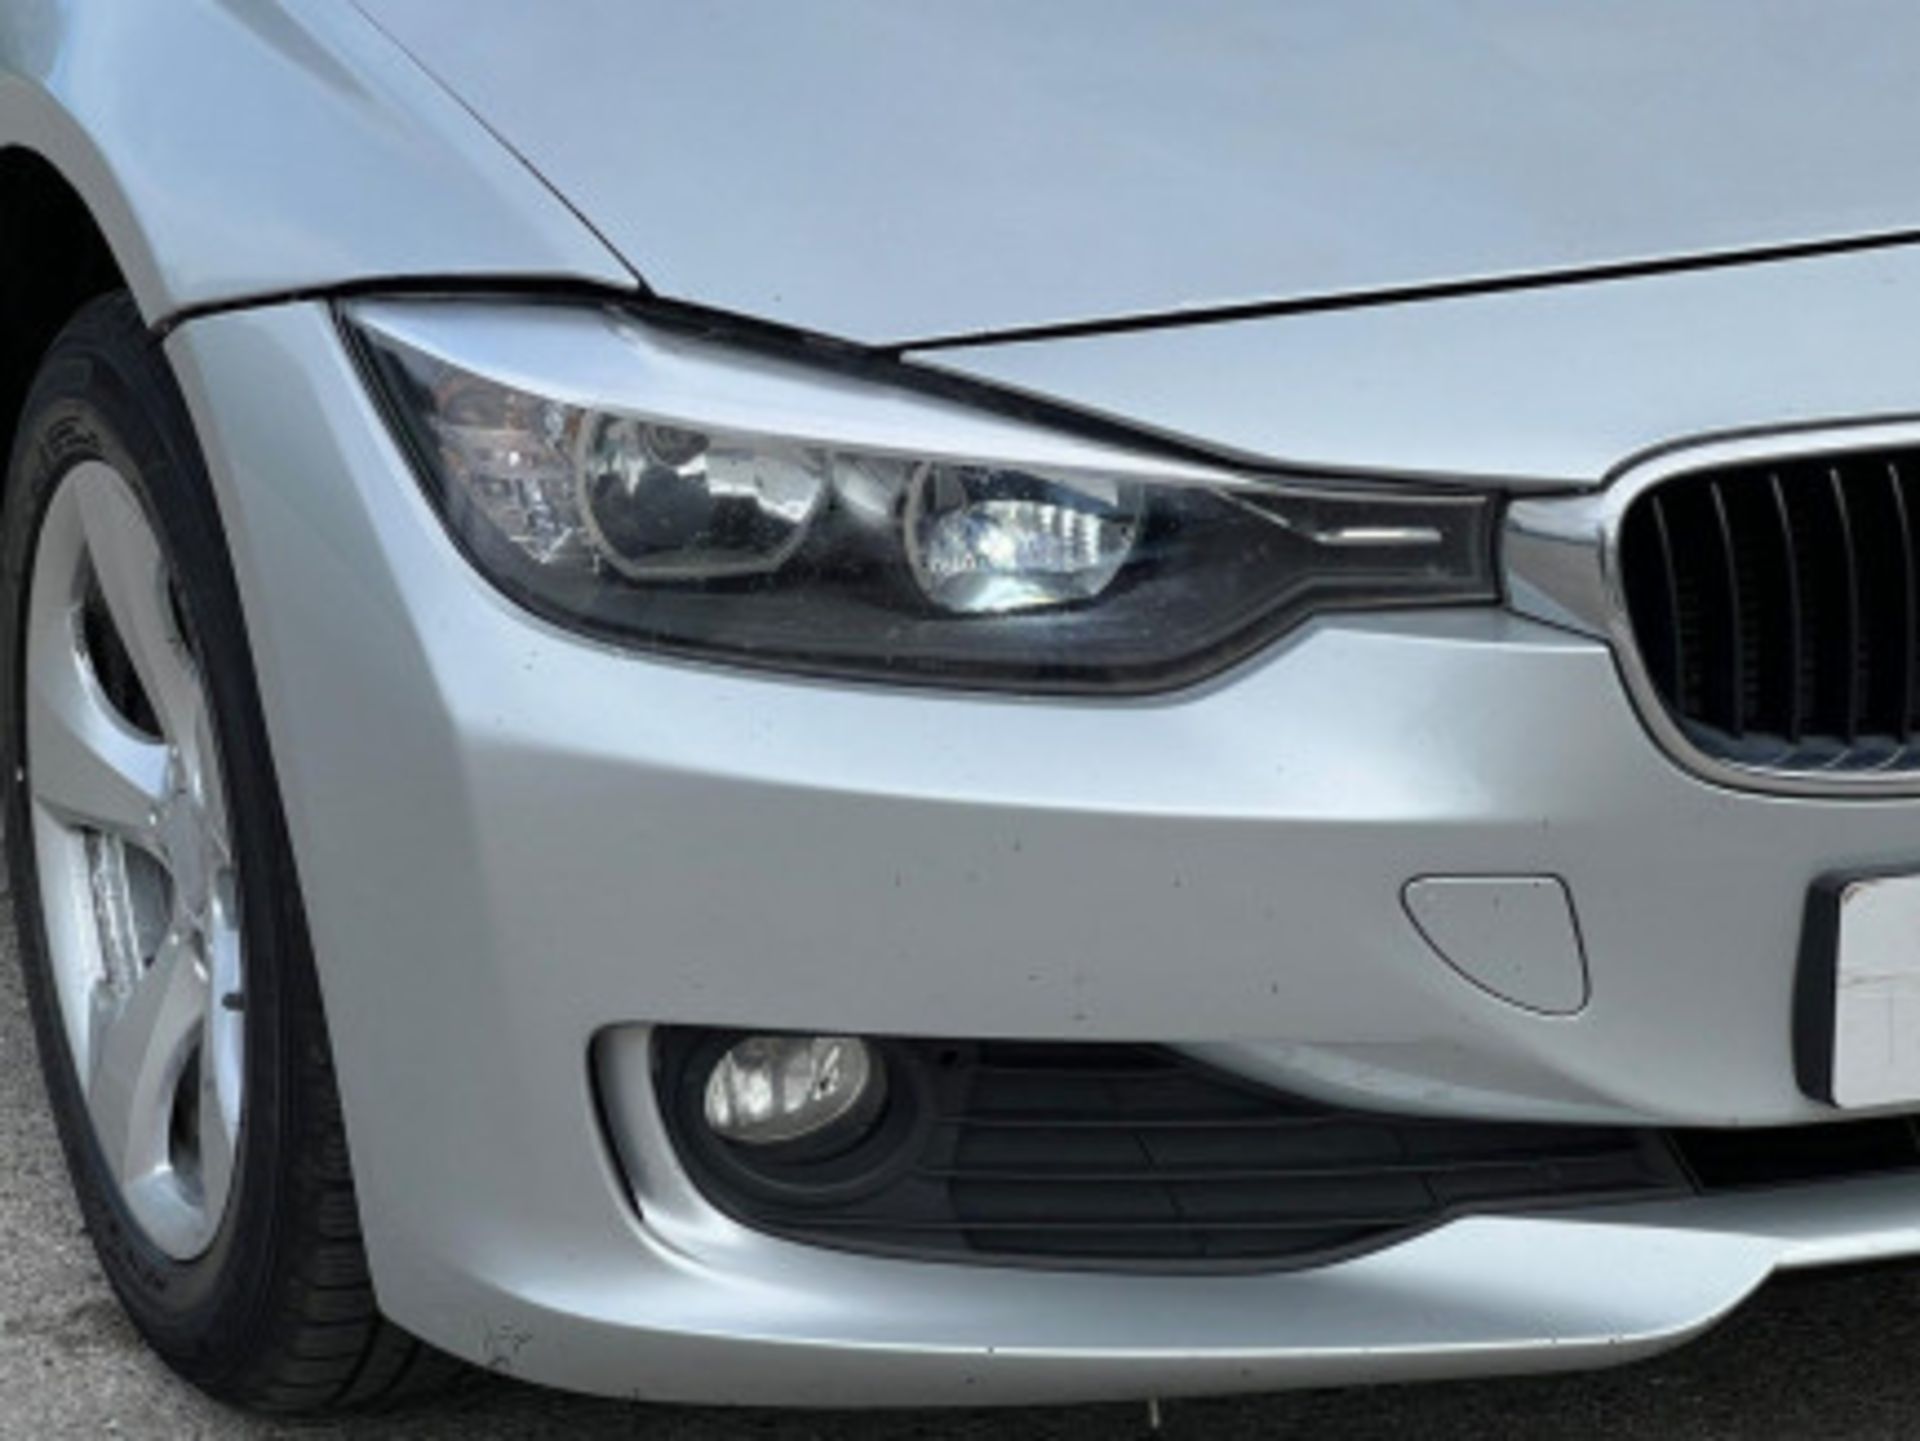 BMW 3 SERIES 2.0 DIESEL ED START STOP - A WELL-MAINTAINED GEM >>--NO VAT ON HAMMER--<< - Image 97 of 229